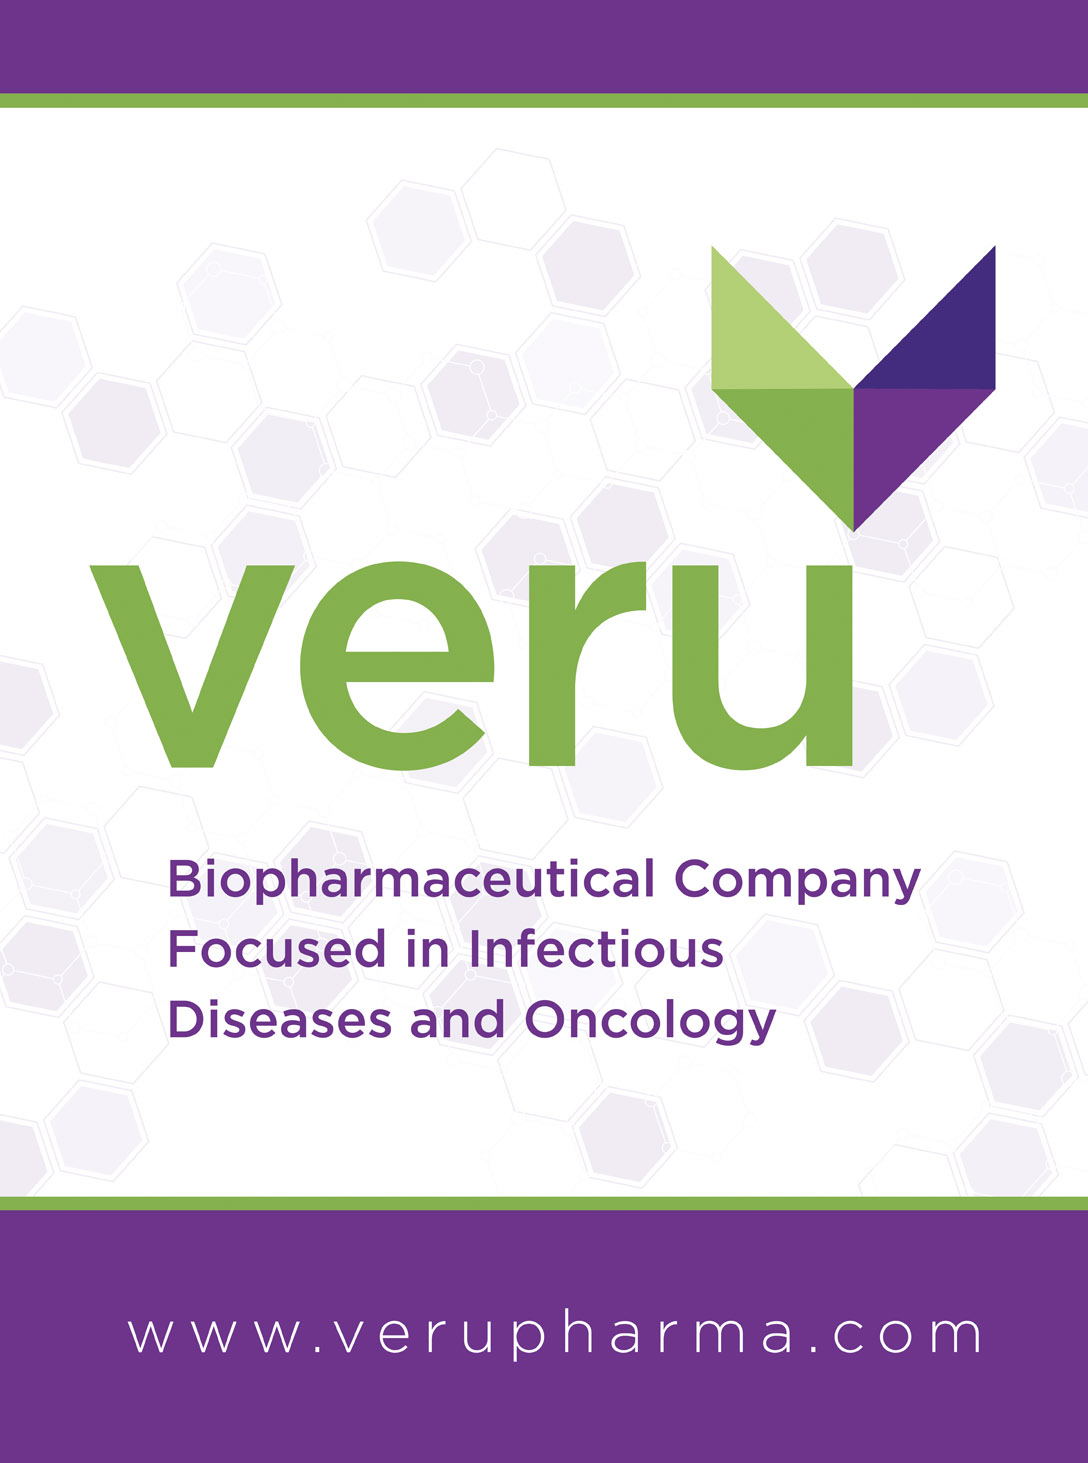 Veru - Biopharmaceutical Company Focused in Infectious Diseases and Oncology